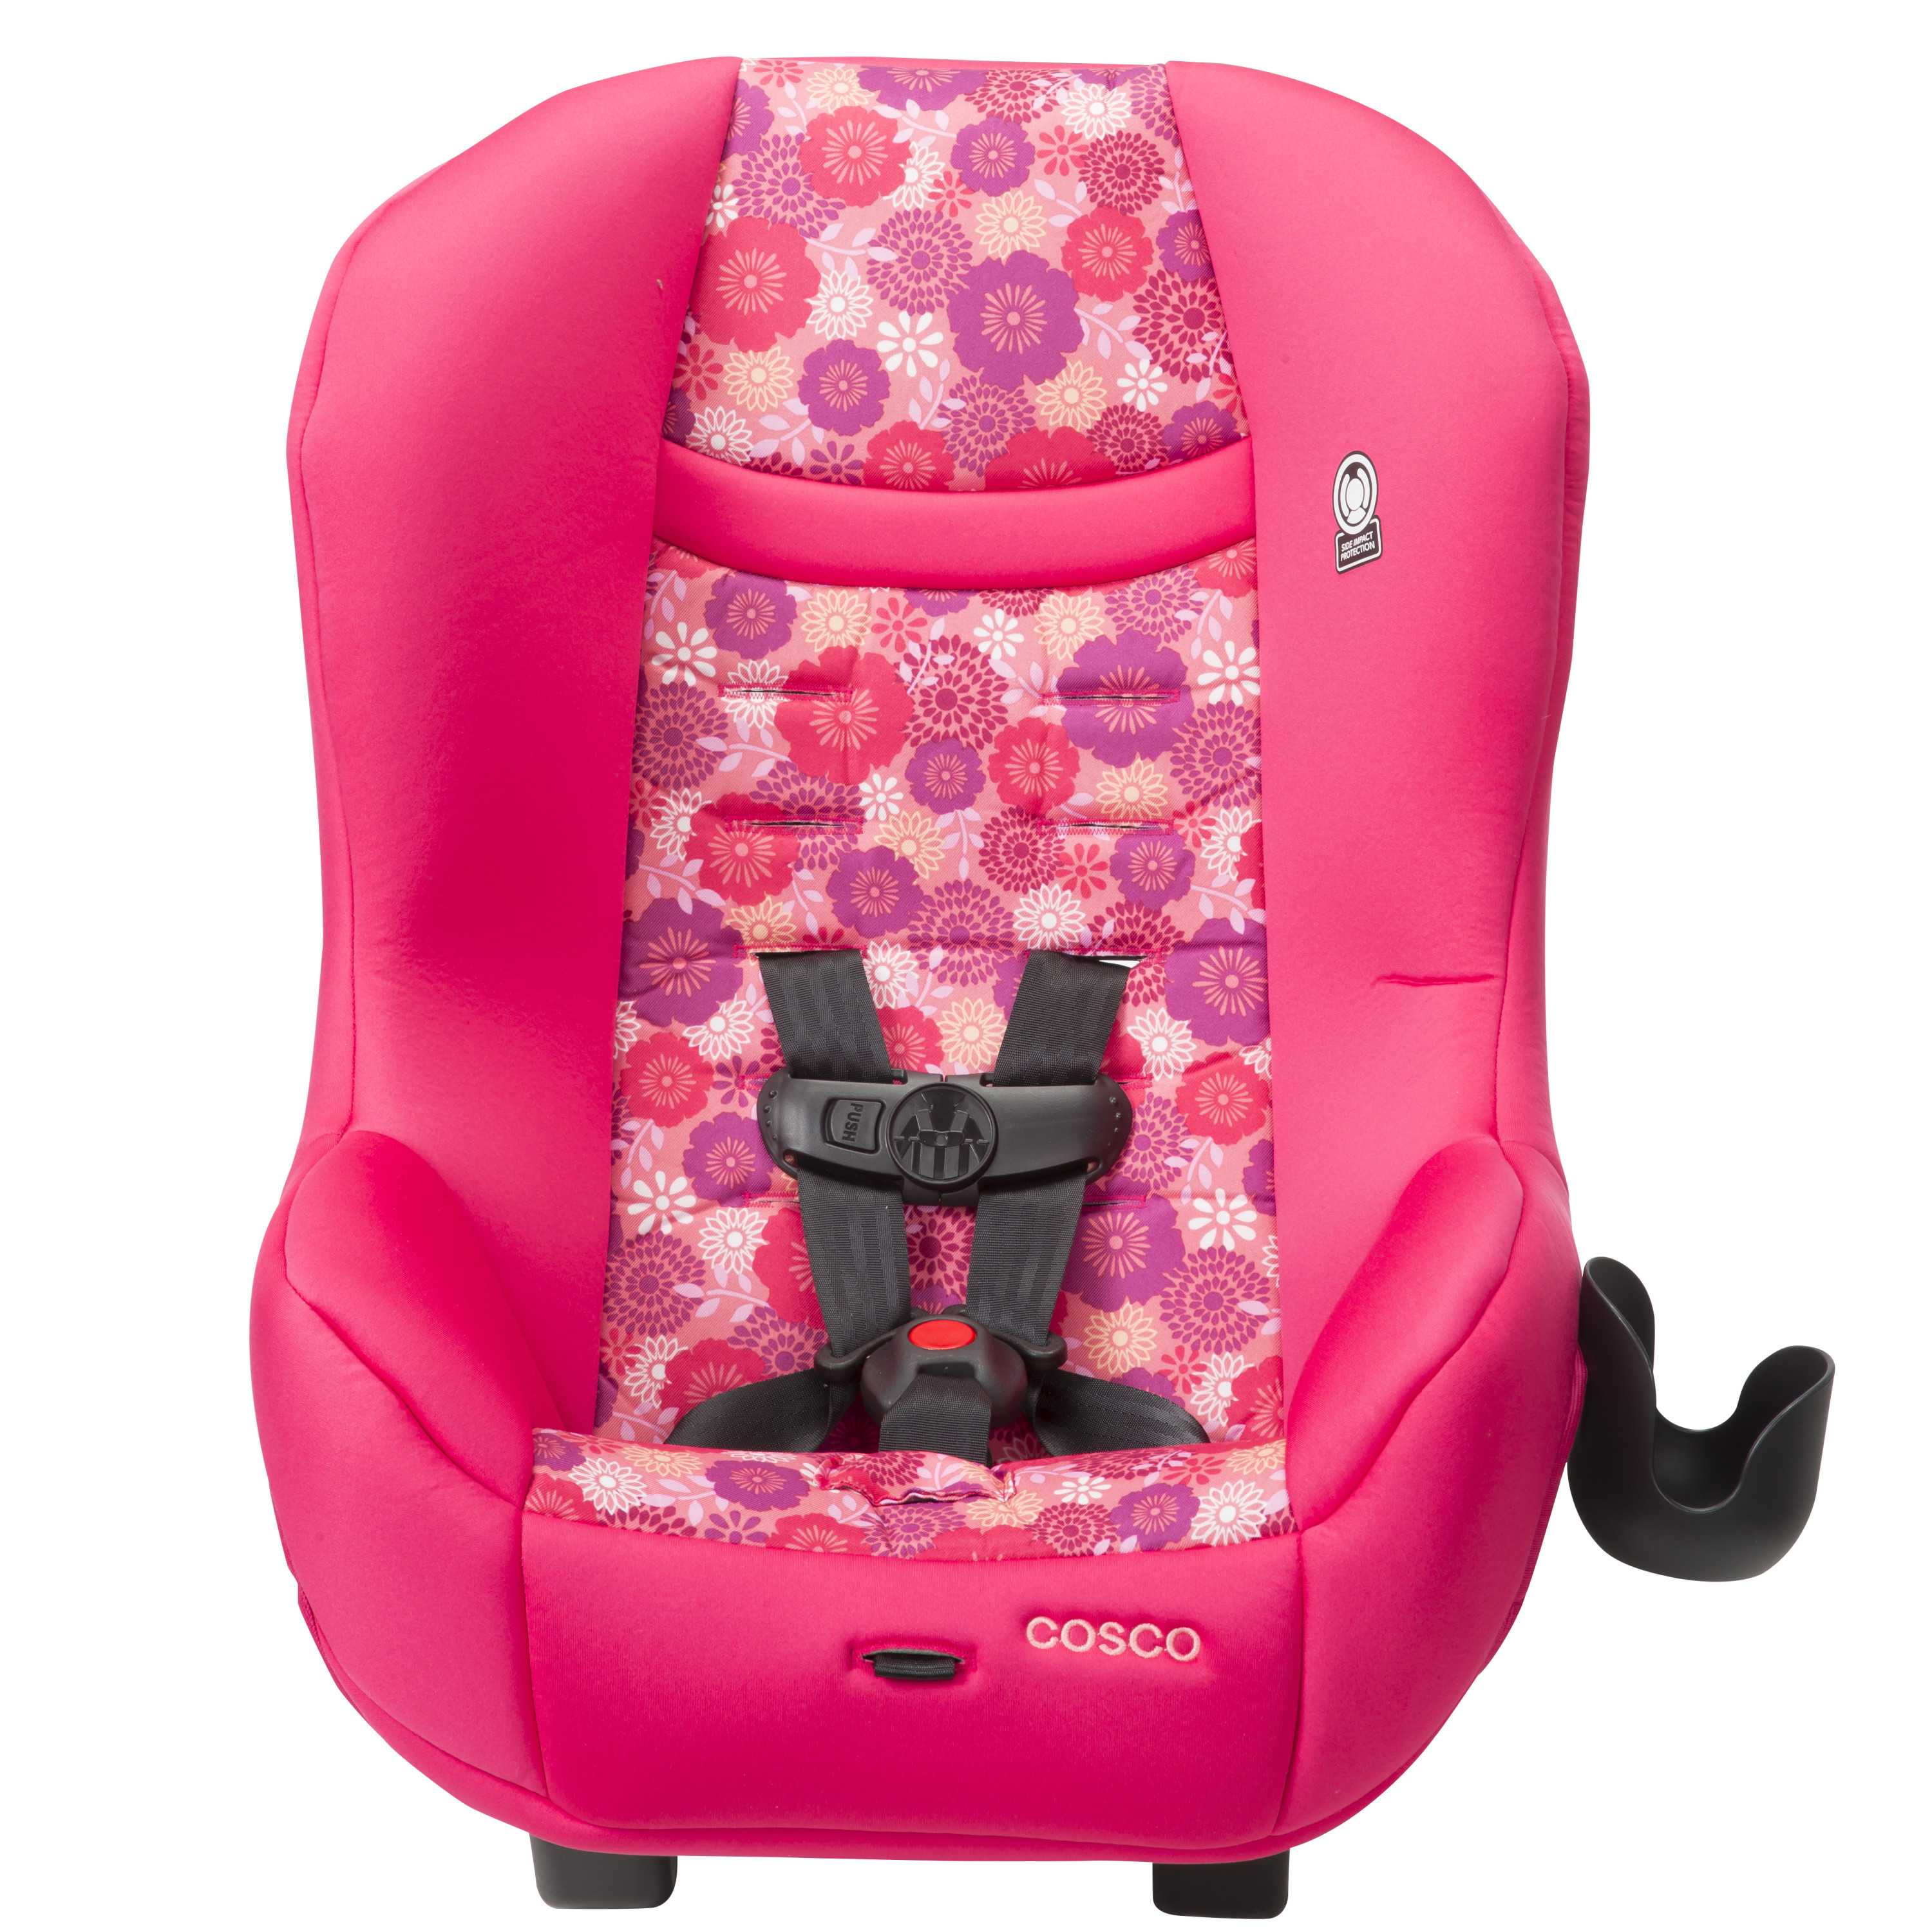 Cosco Scenera Convertible Car Seat, Floral Orchard Blossom Pink - image 10 of 13